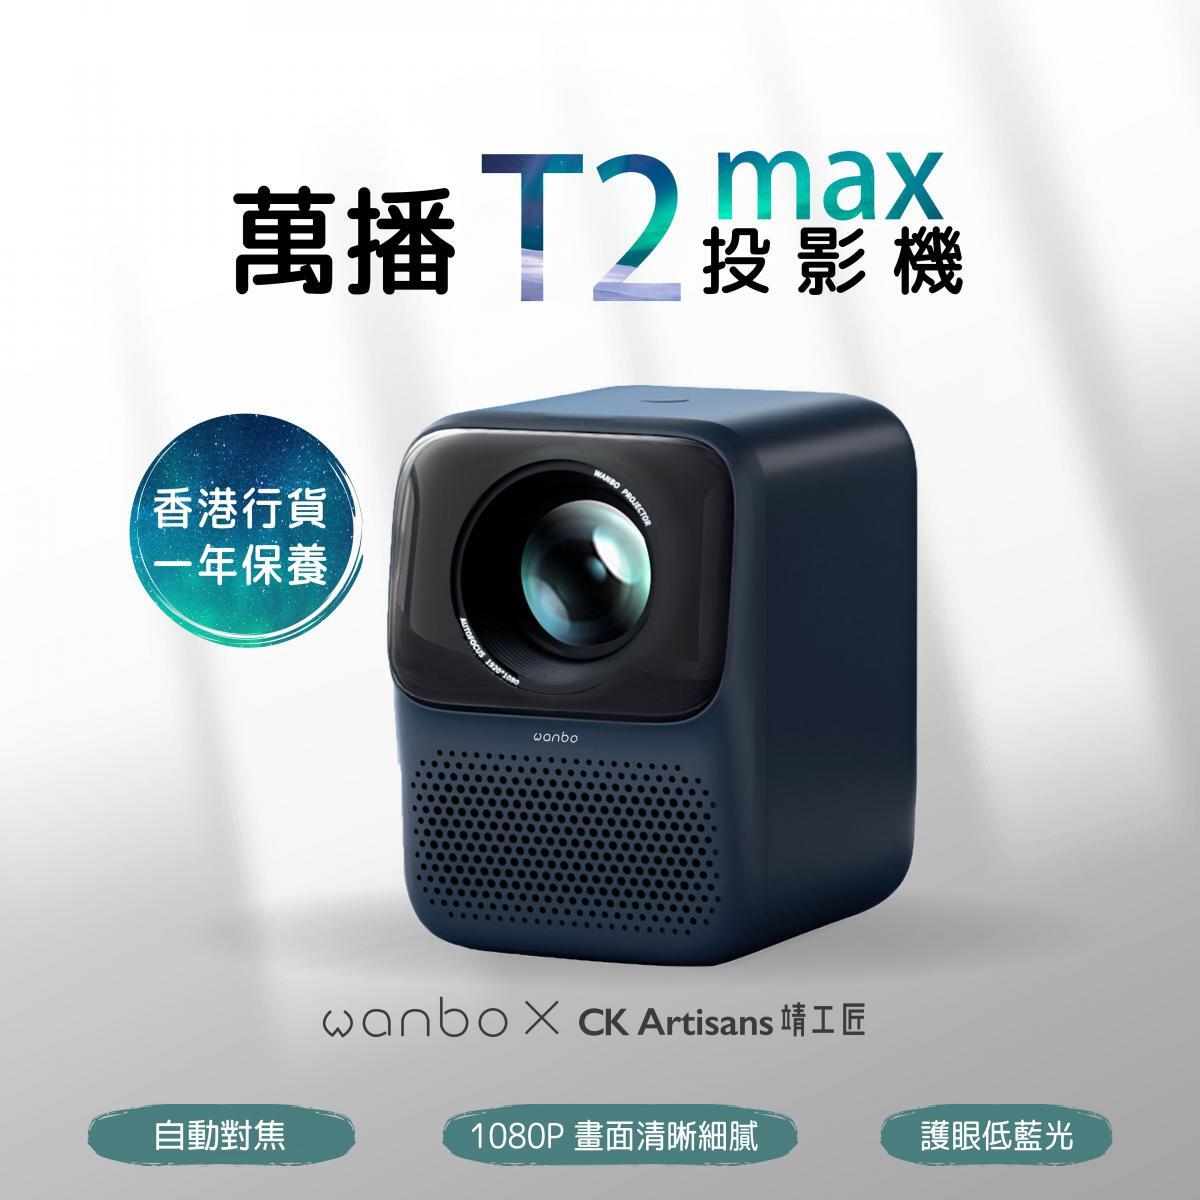 NEW T2 Max 1080P HD Projector | AI Auto Focus | Android TV | Blue | 12-Month Warranty | CKA34008